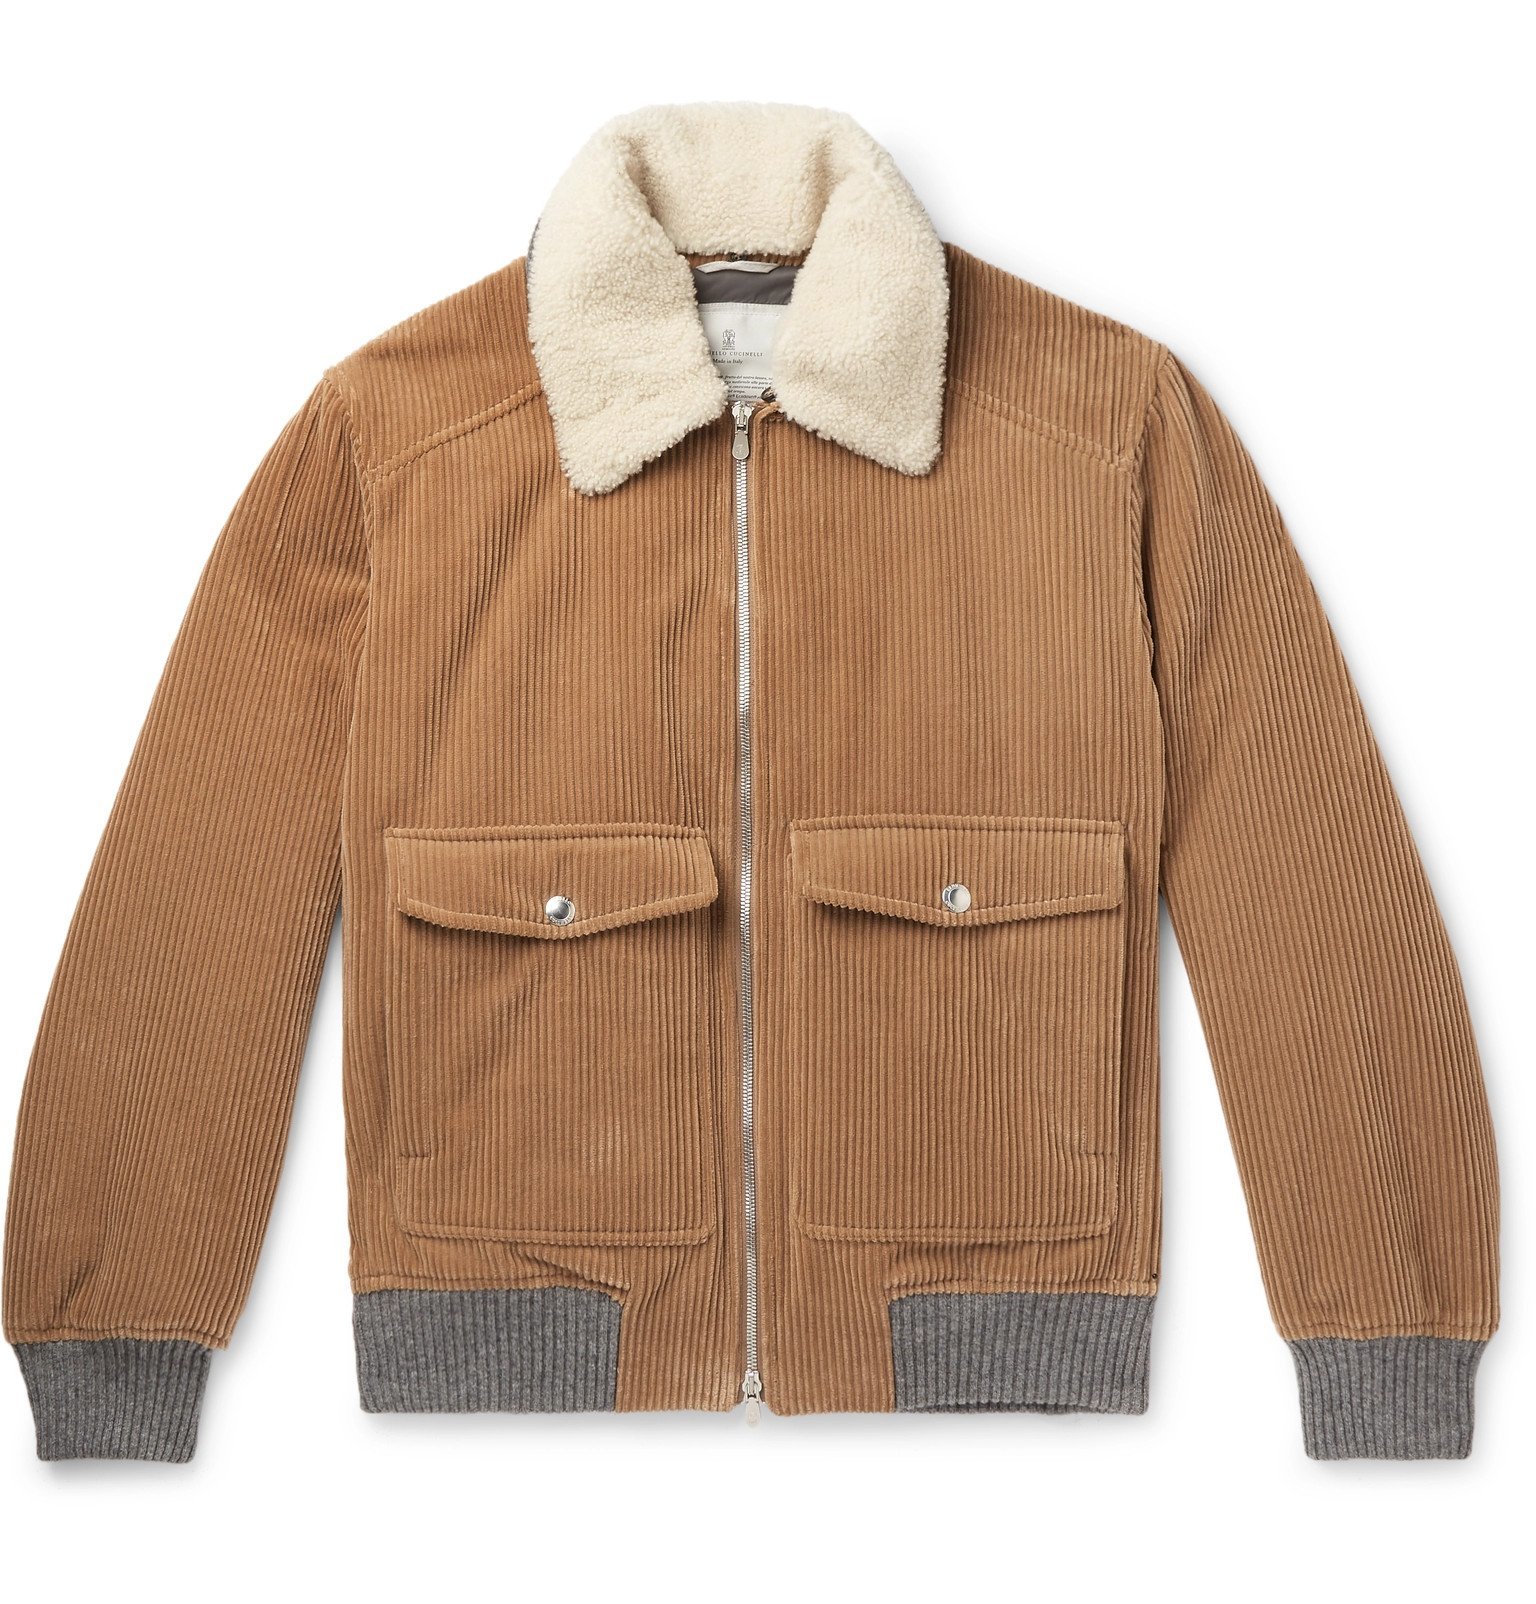 Brunello Cucinelli - Shearling-Trimmed Cotton and Cashmere-Blend ...